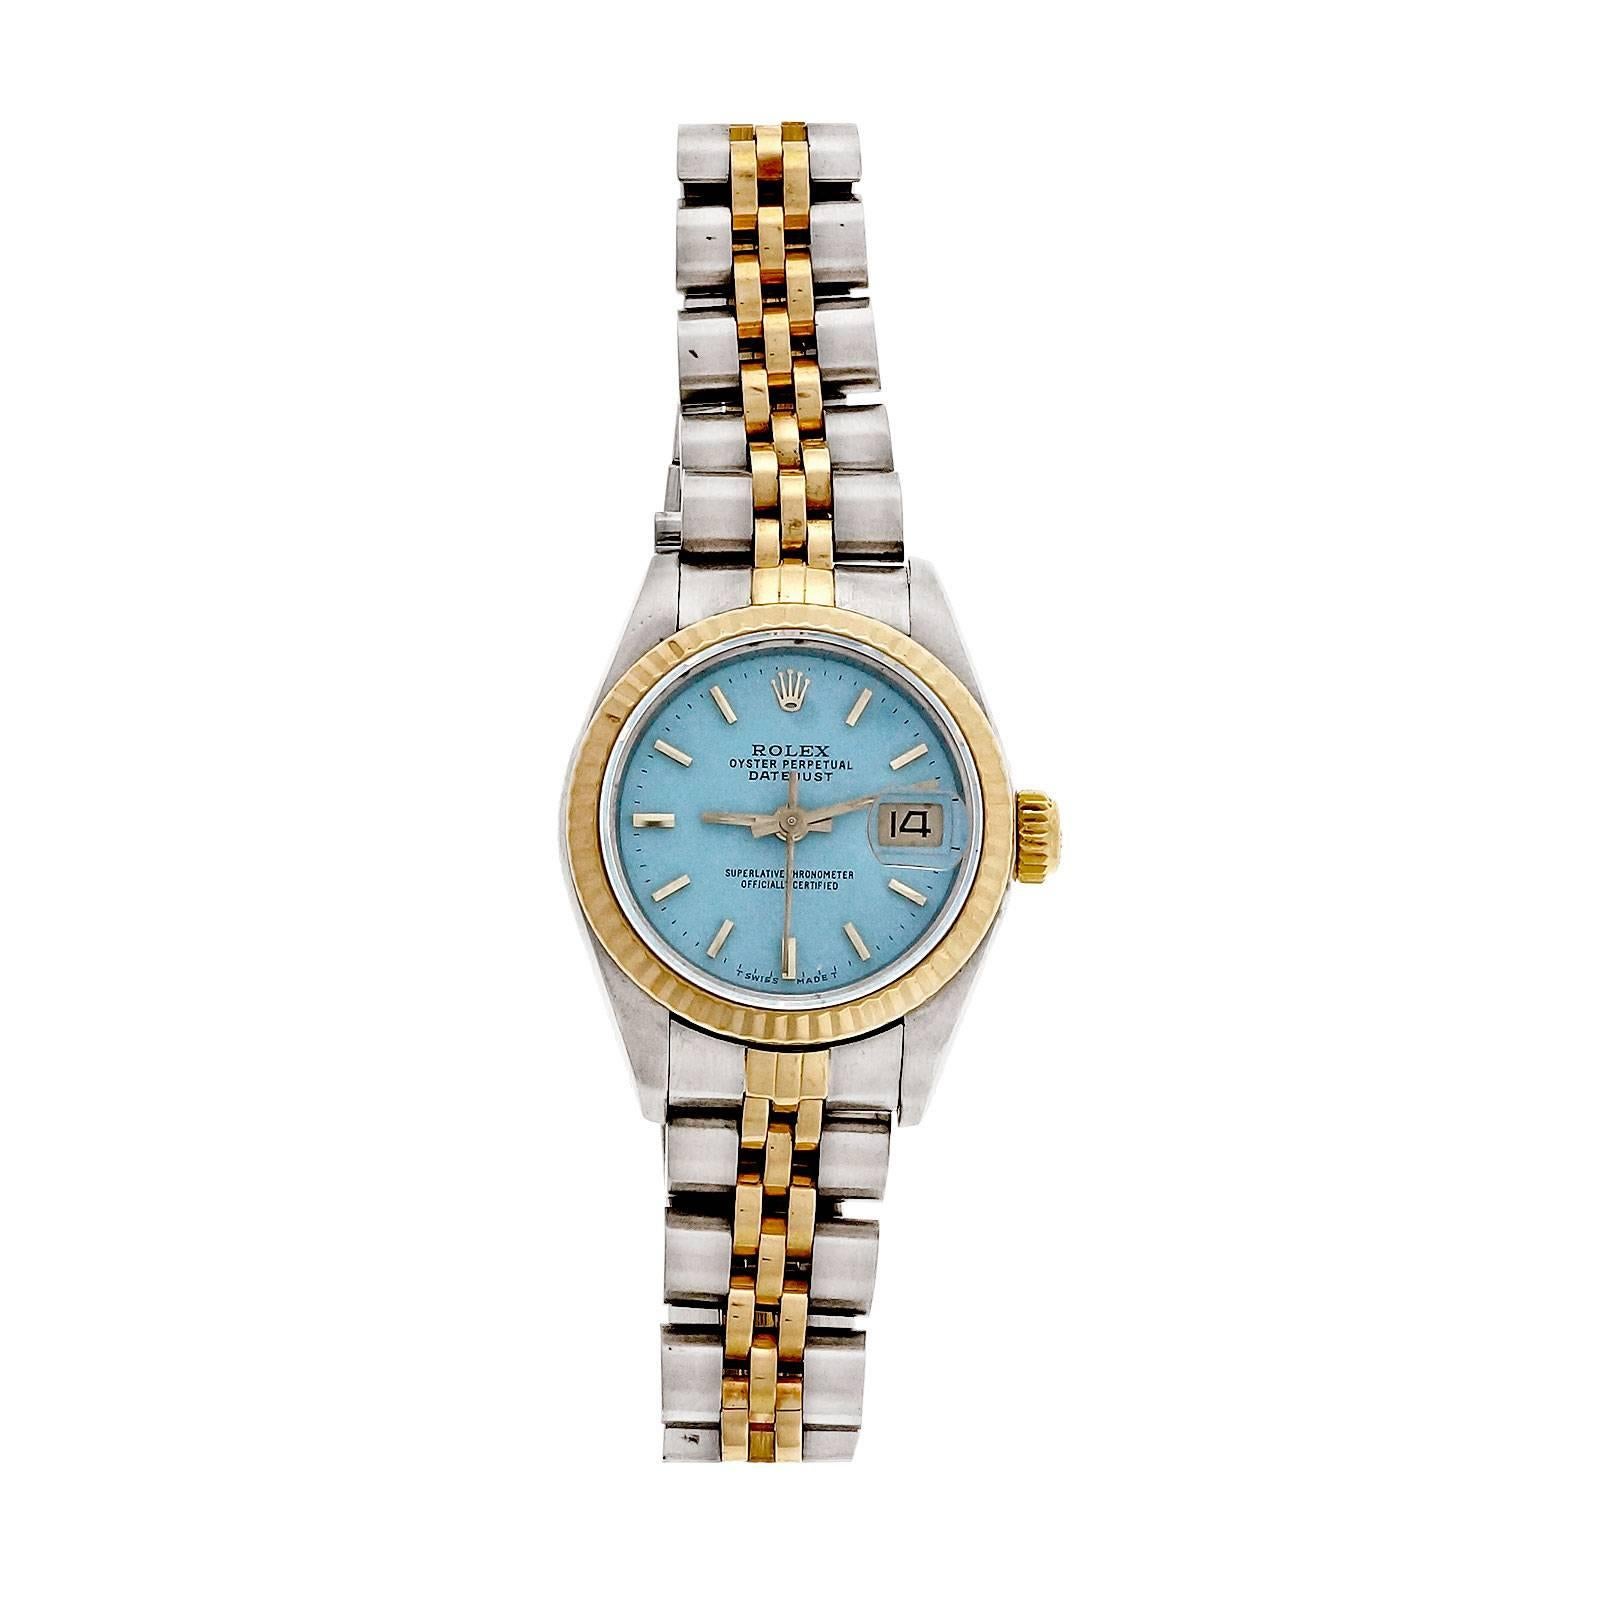 Rolex ladies Datejust 18k yellow gold and steel wrist watch. Sapphire crystal Jubilee band. Custom refinished Turquoise blue dial. Ref 6917

18k yellow gold and steel
Band length: 6 1/8 inches (links adjustable)
Length: 32.46mm
Width: